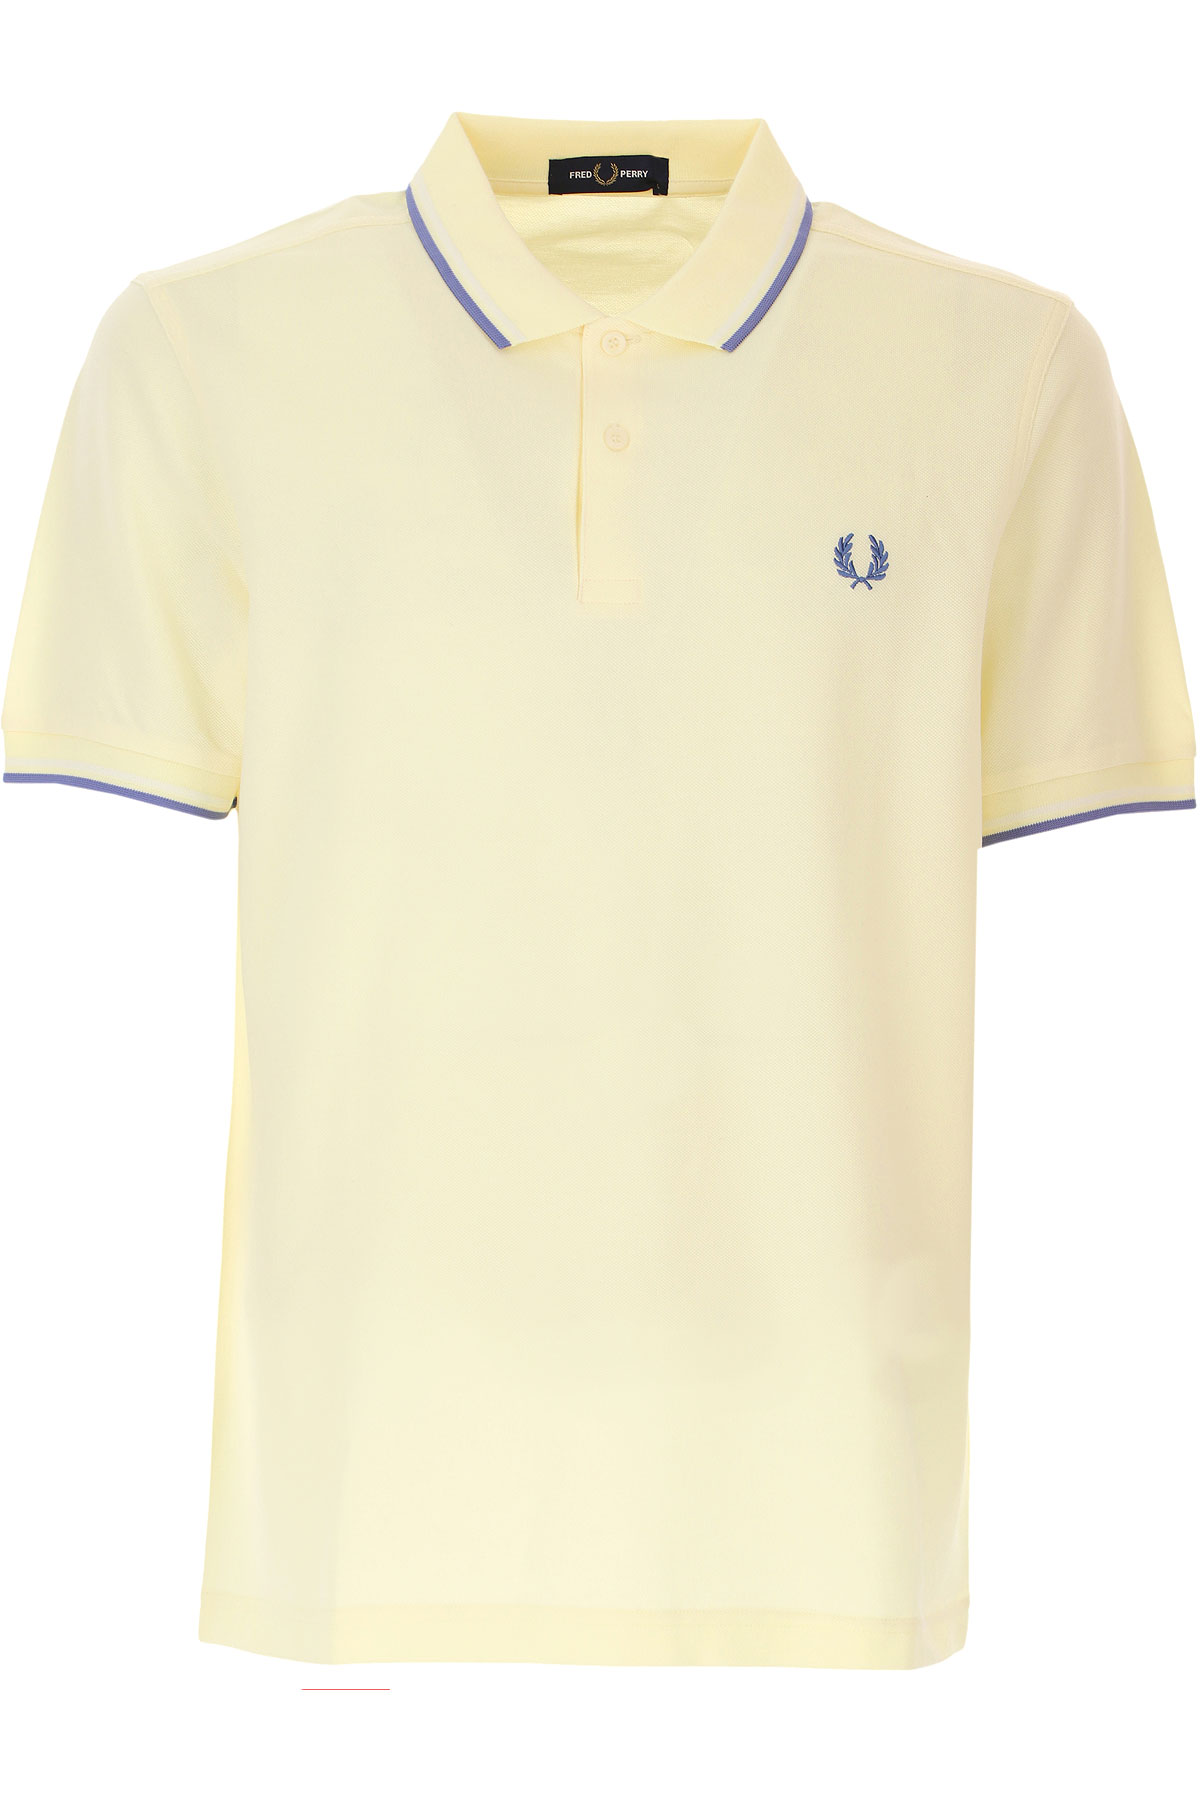 Mens Clothing Fred Perry, Style code: m3600-j87-